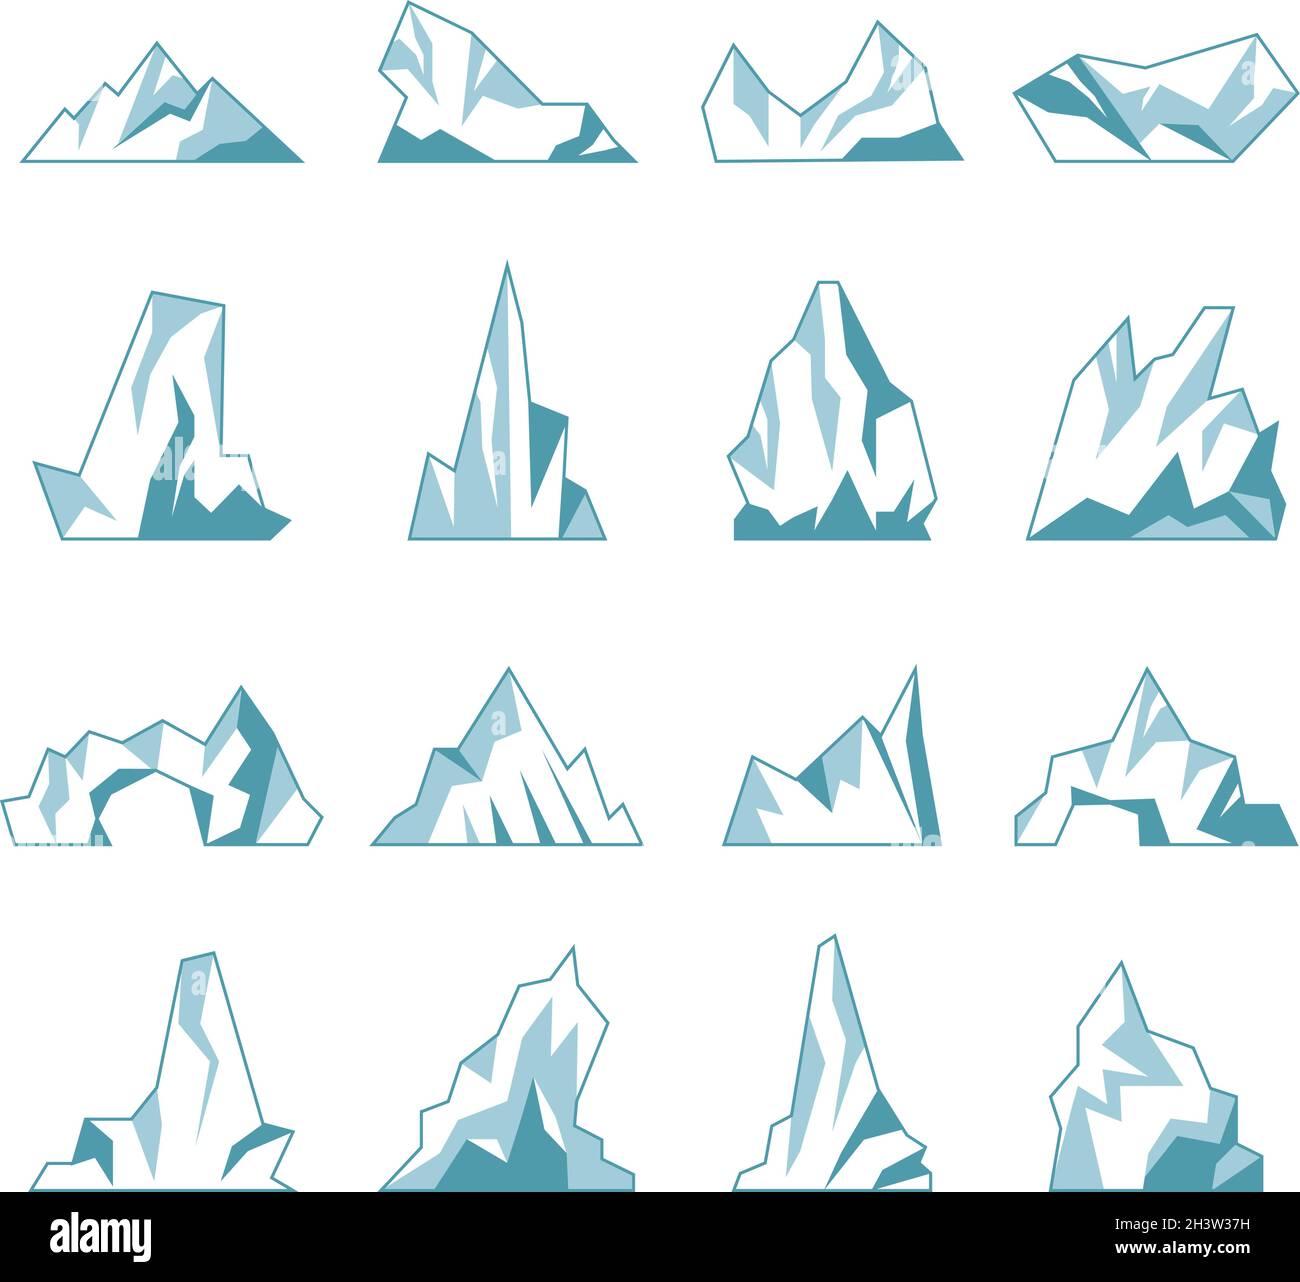 Iceberg. North pole hills winter mountains in ocean freezing ice rock snow recent vector collection Stock Vector